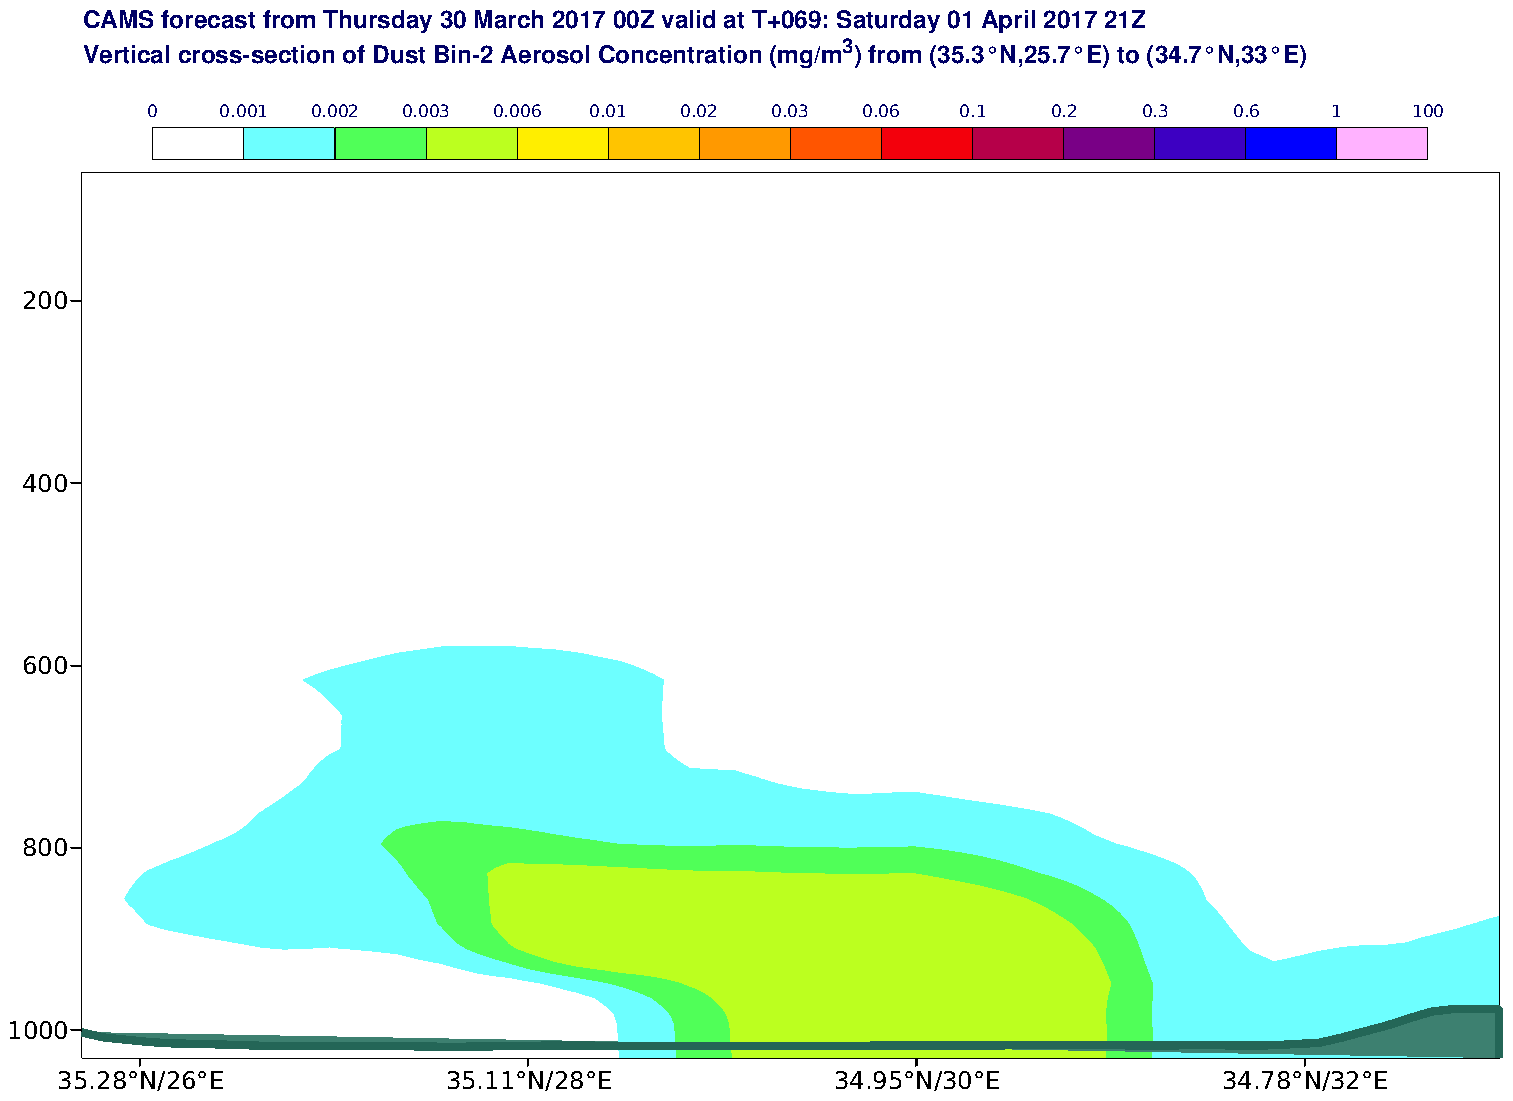 Vertical cross-section of Dust Bin-2 Aerosol Concentration (mg/m3) valid at T69 - 2017-04-01 21:00